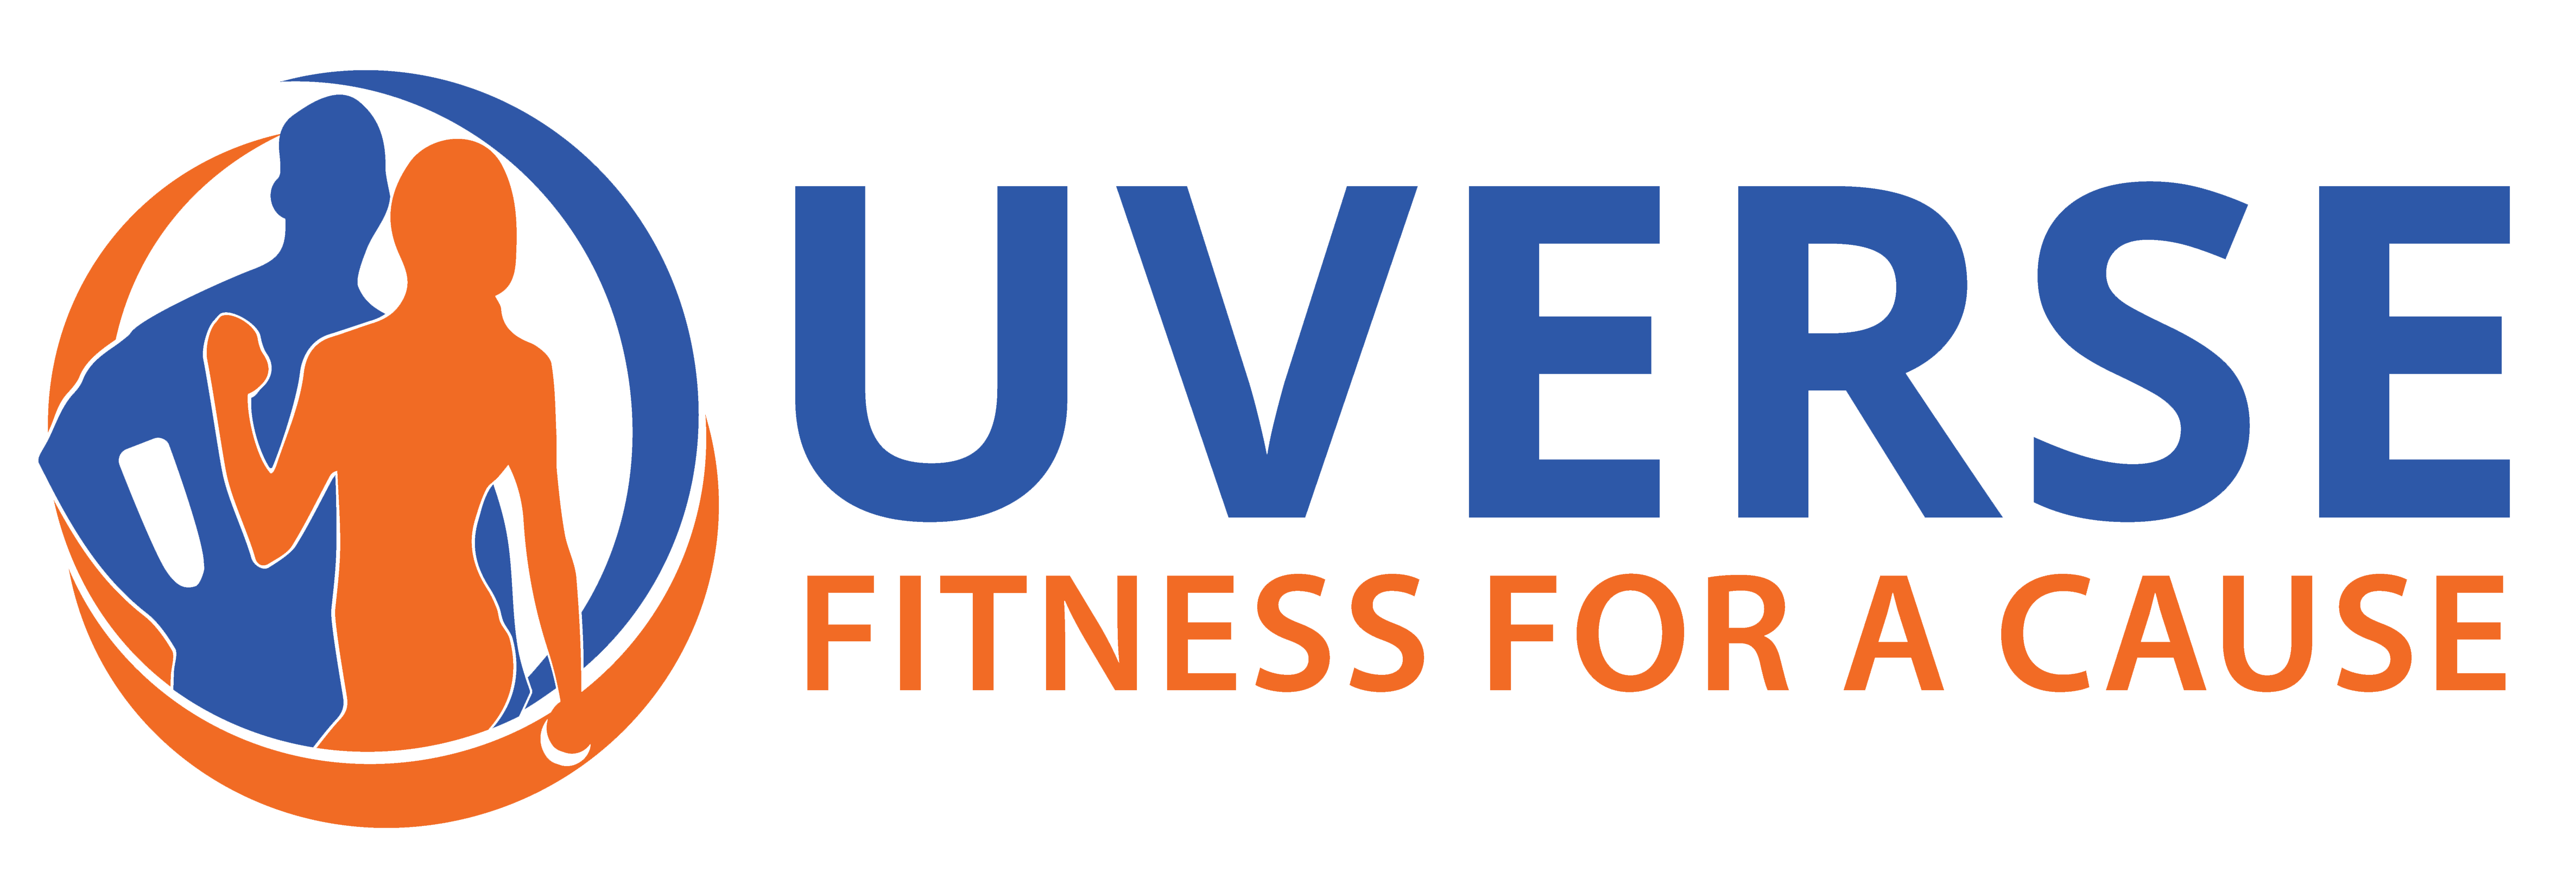 Users | Uverse Fitness